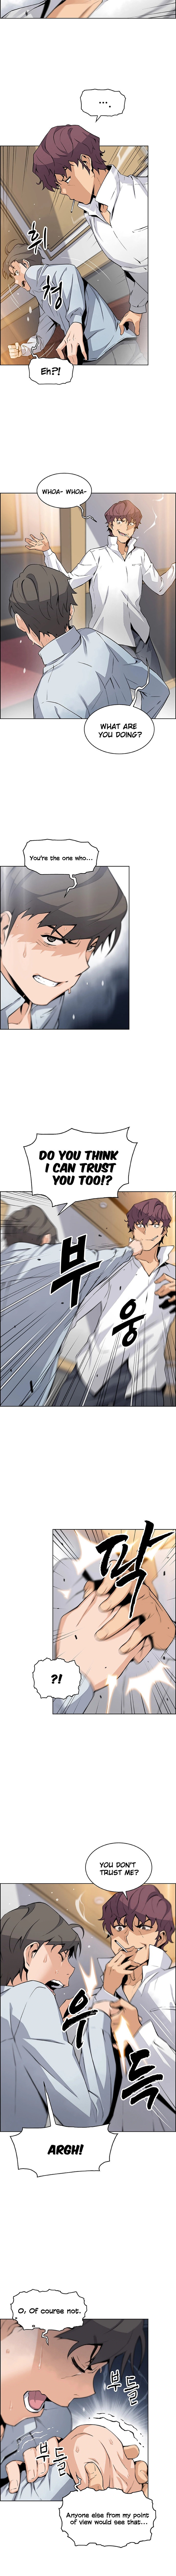 Housekeeper Manhwa - Chapter 46 Page 4